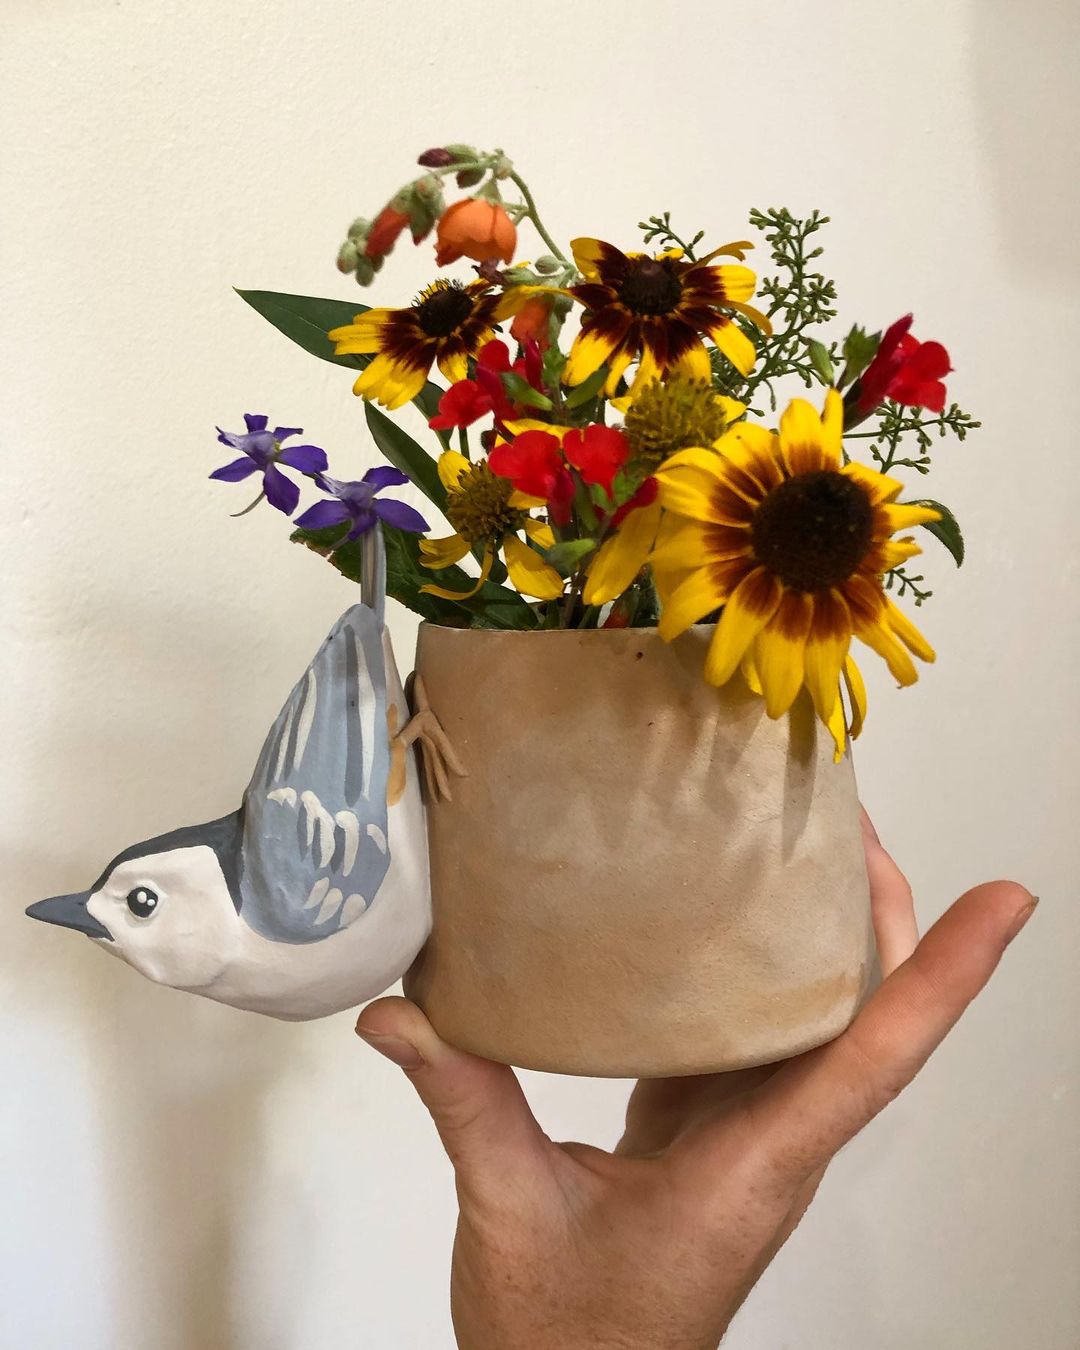 Ceramic Vases Ornate With Realistic Bird Sculptures By Sarah Conti (14)